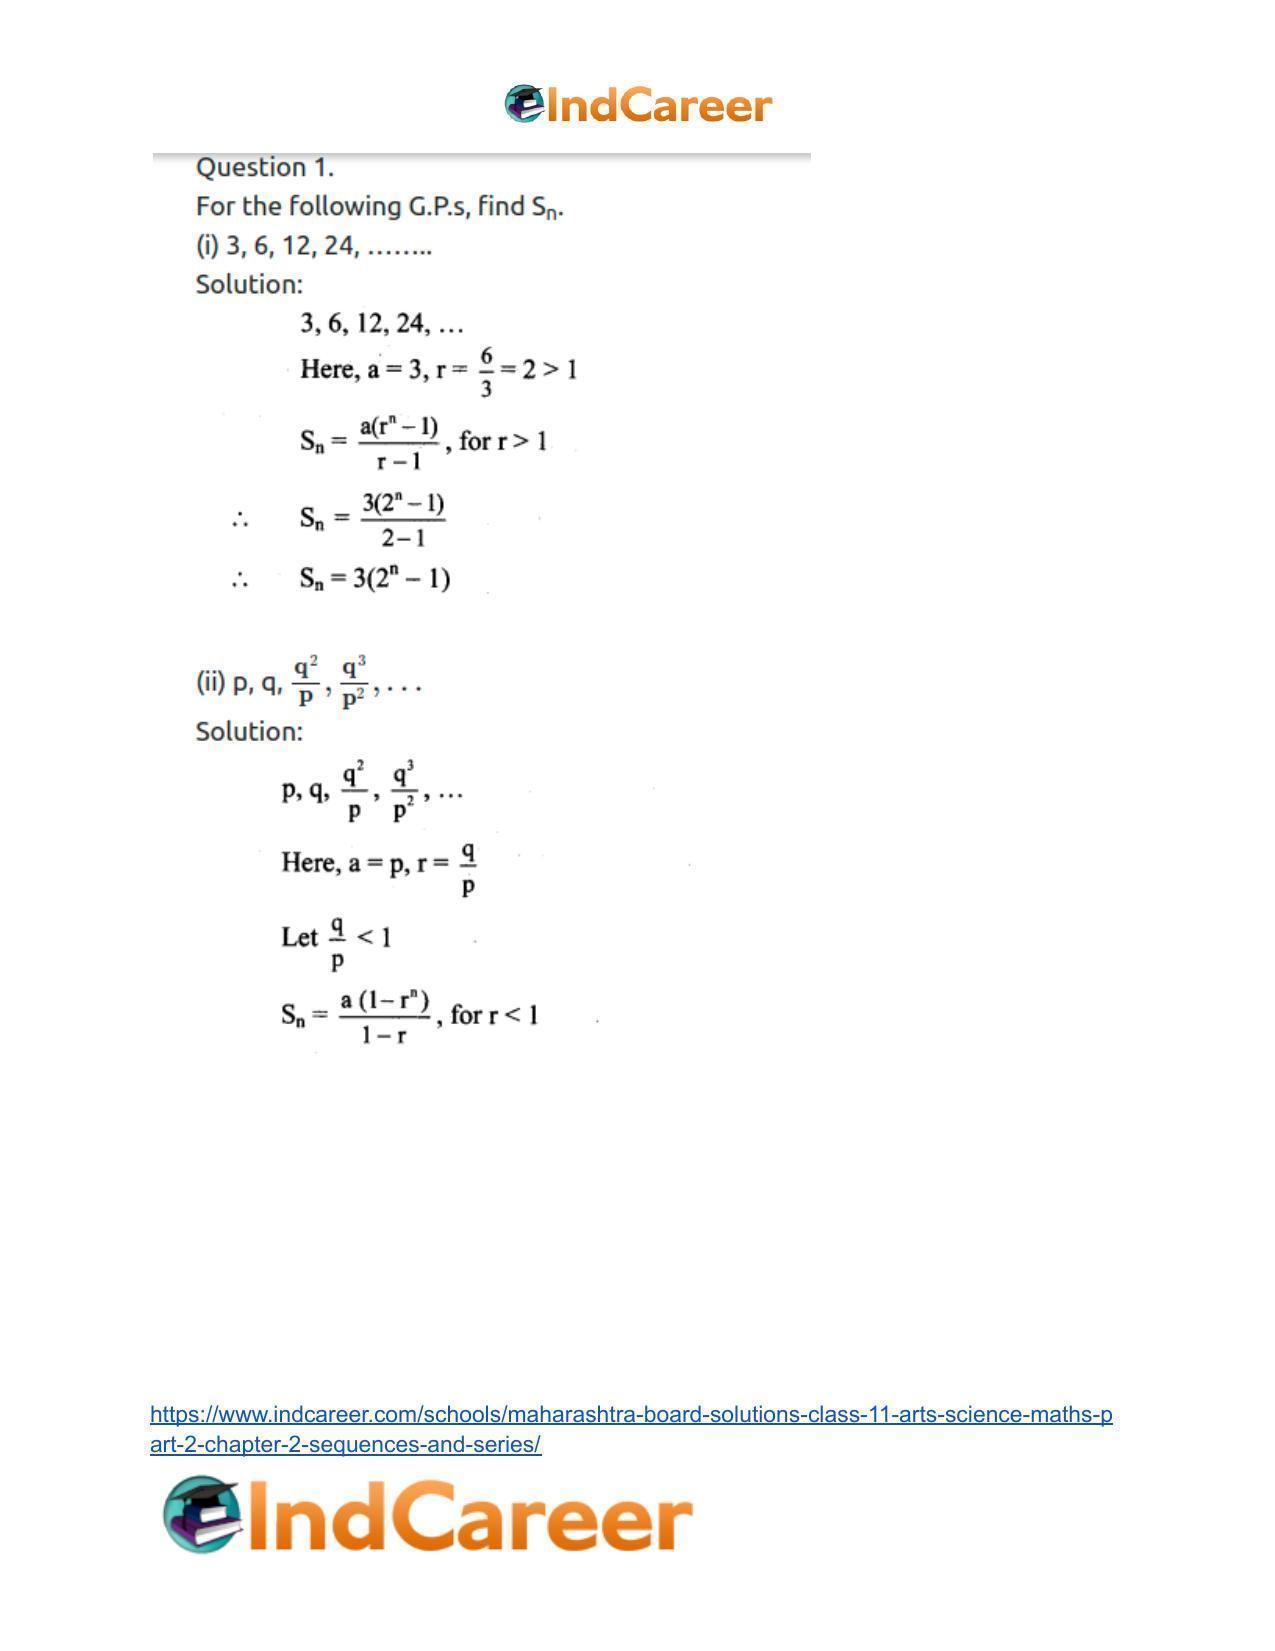 Maharashtra Board Solutions Class 11-Arts & Science Maths (Part 2): Chapter 2- Sequences and Series - Page 21